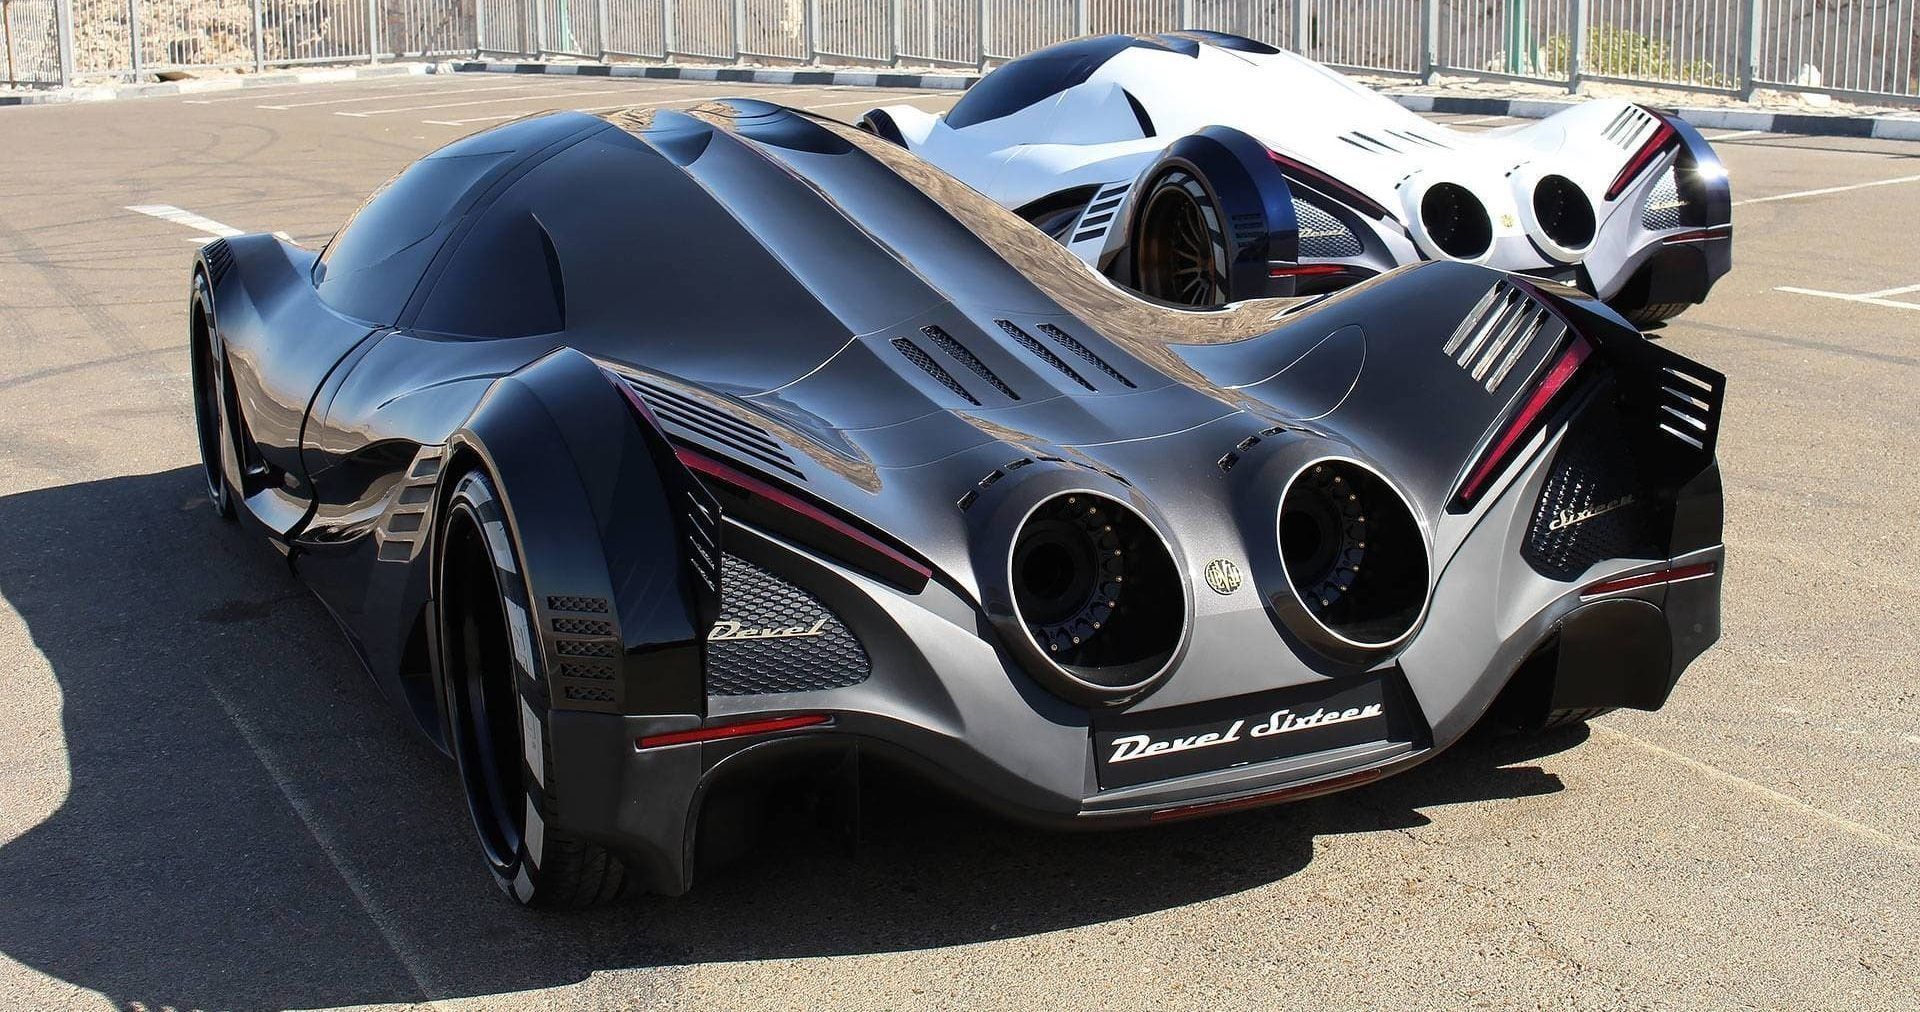 Devel Sixteen: 10 Things You Didn't Know About The Engine